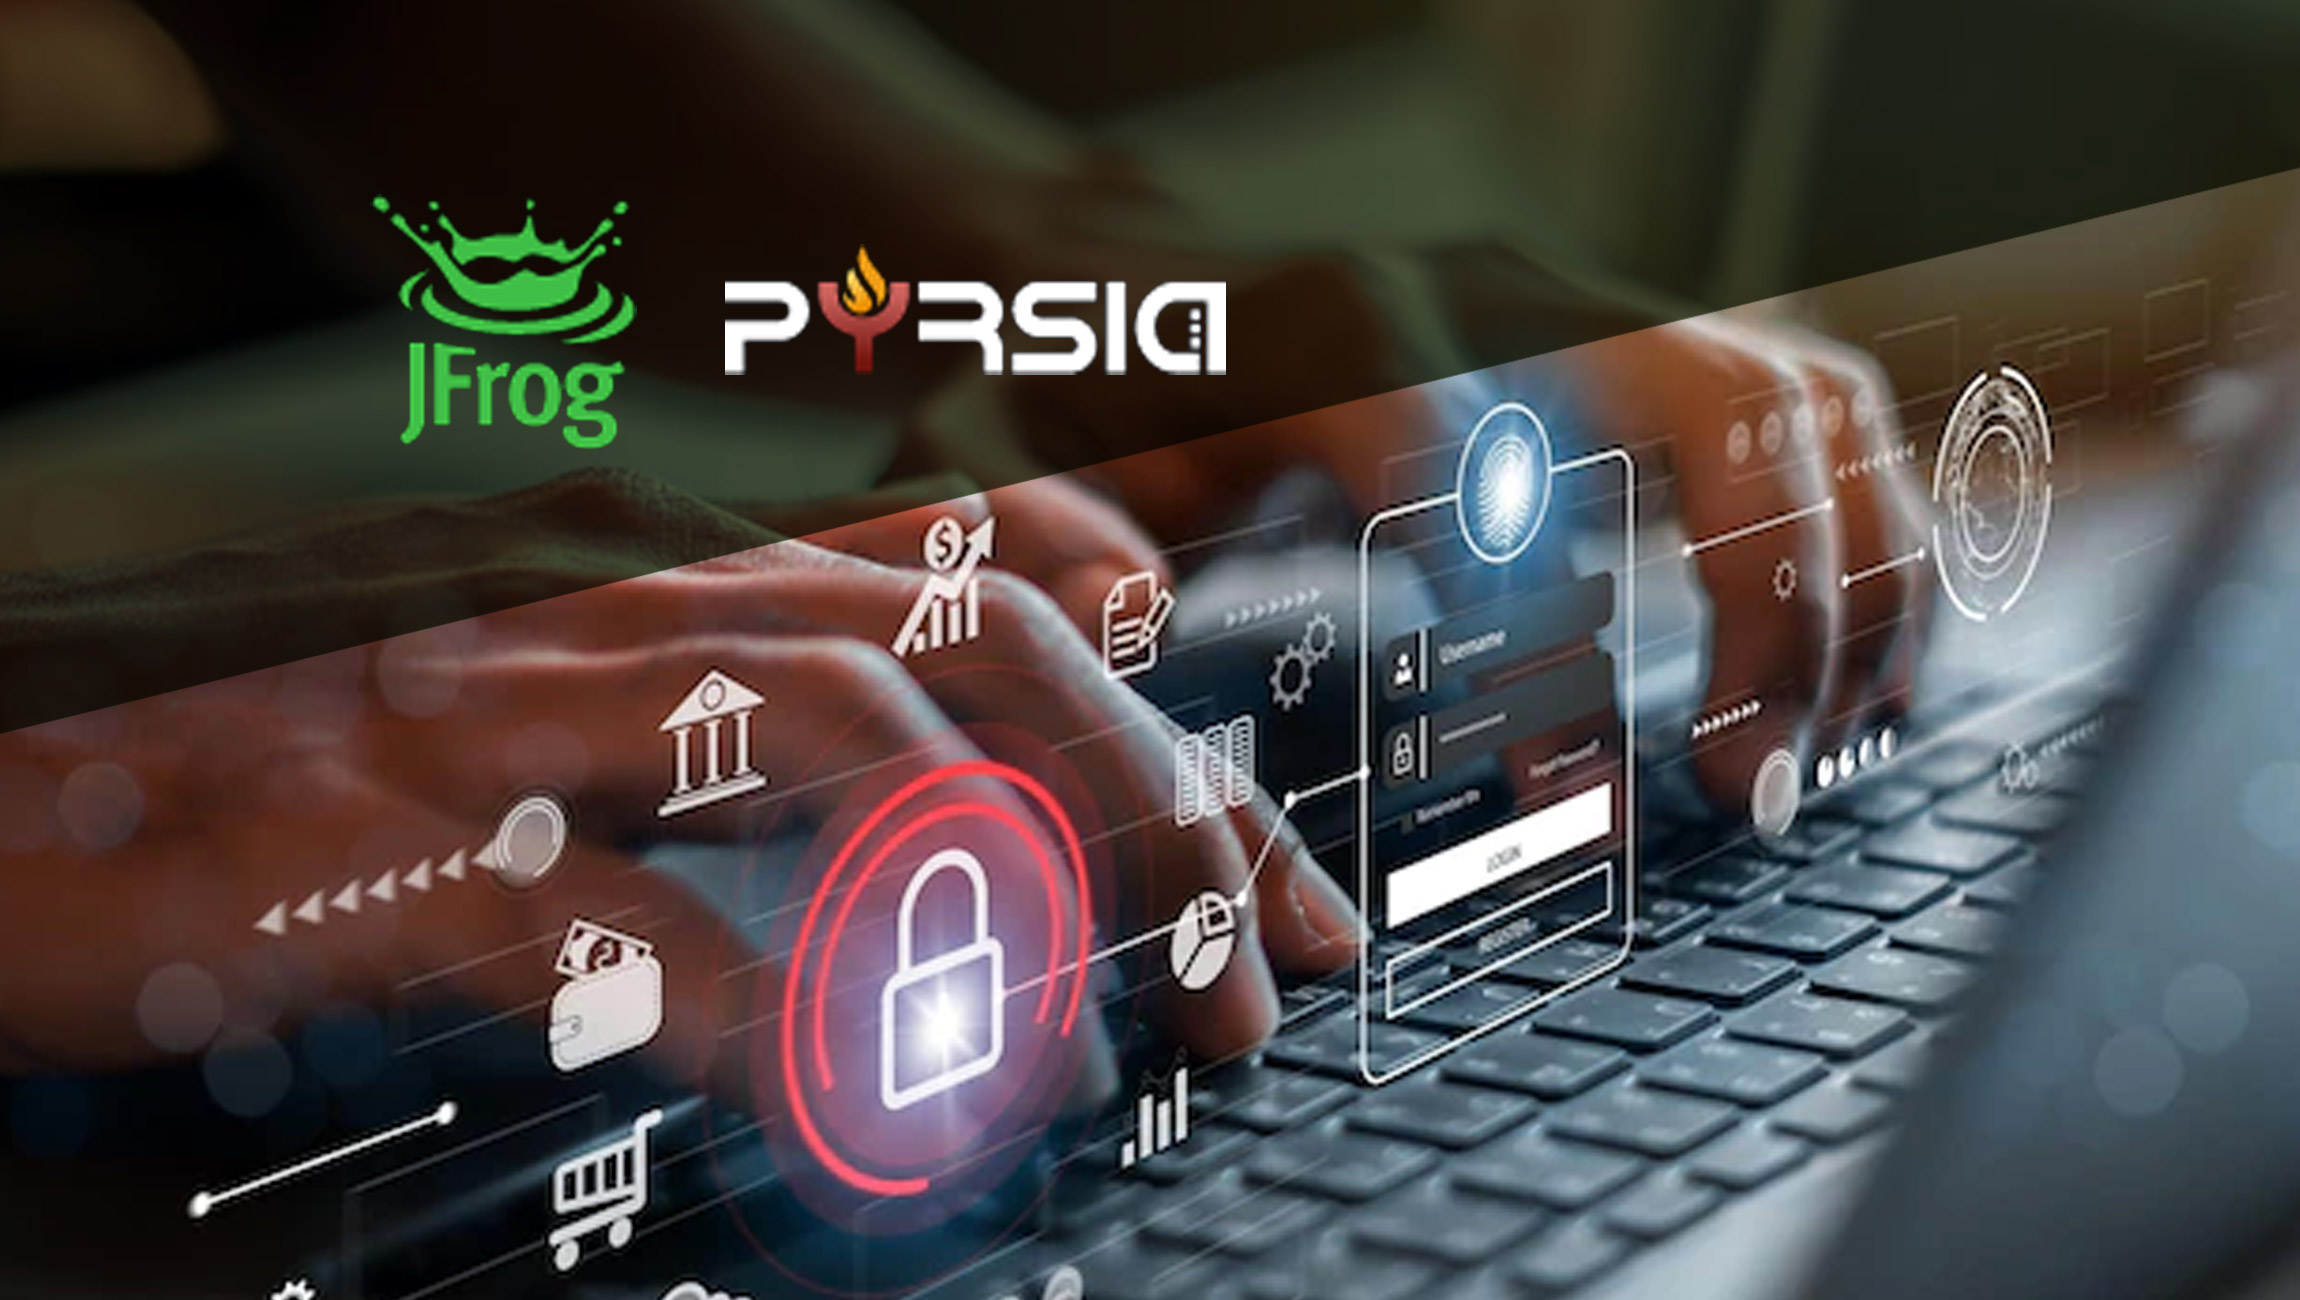 JFrog-Ushers-in-New-Era-of-Open-Source-Software-Security_-Launching-Project-Pyrsia-to-Help-Prevent-Software-Supply-Chain-Attacks